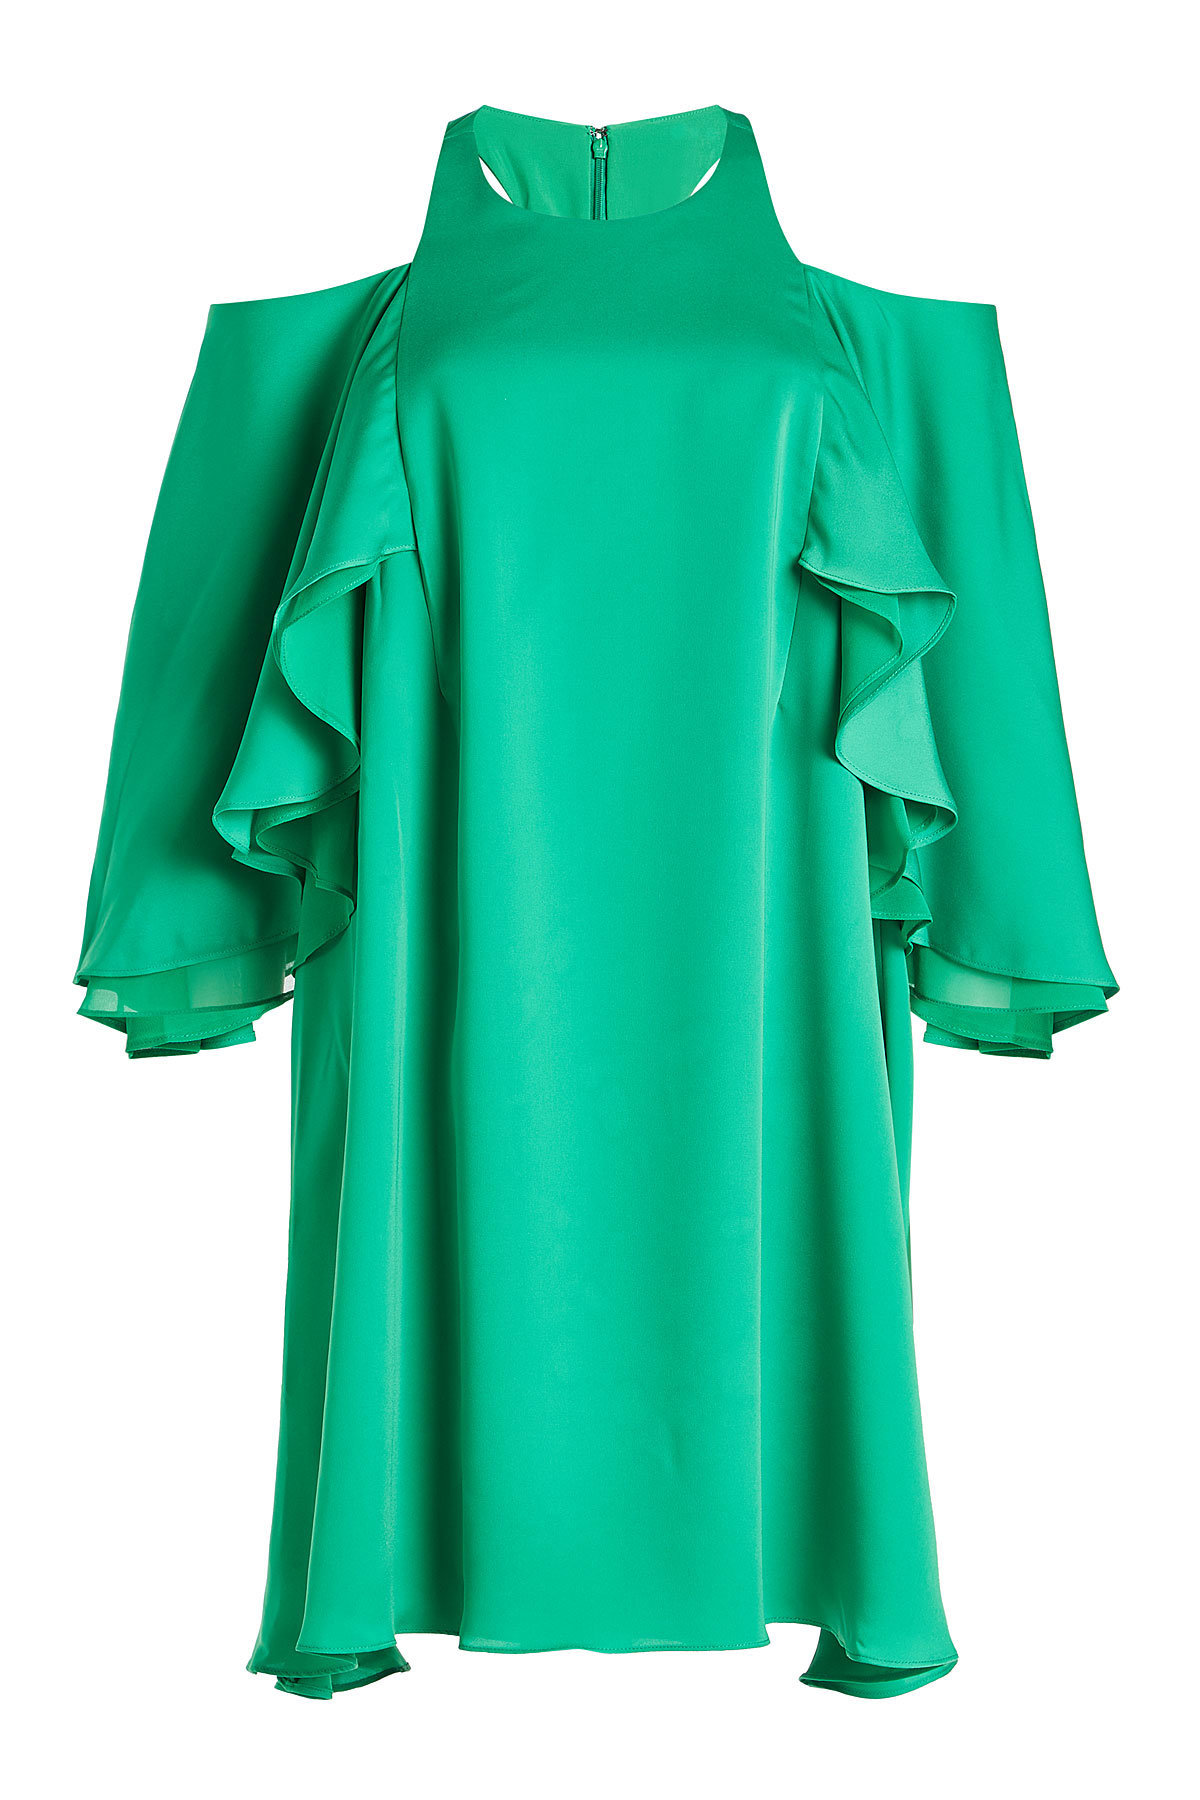 Halston Heritage - Cold-Shoulder Dress with Ruffles